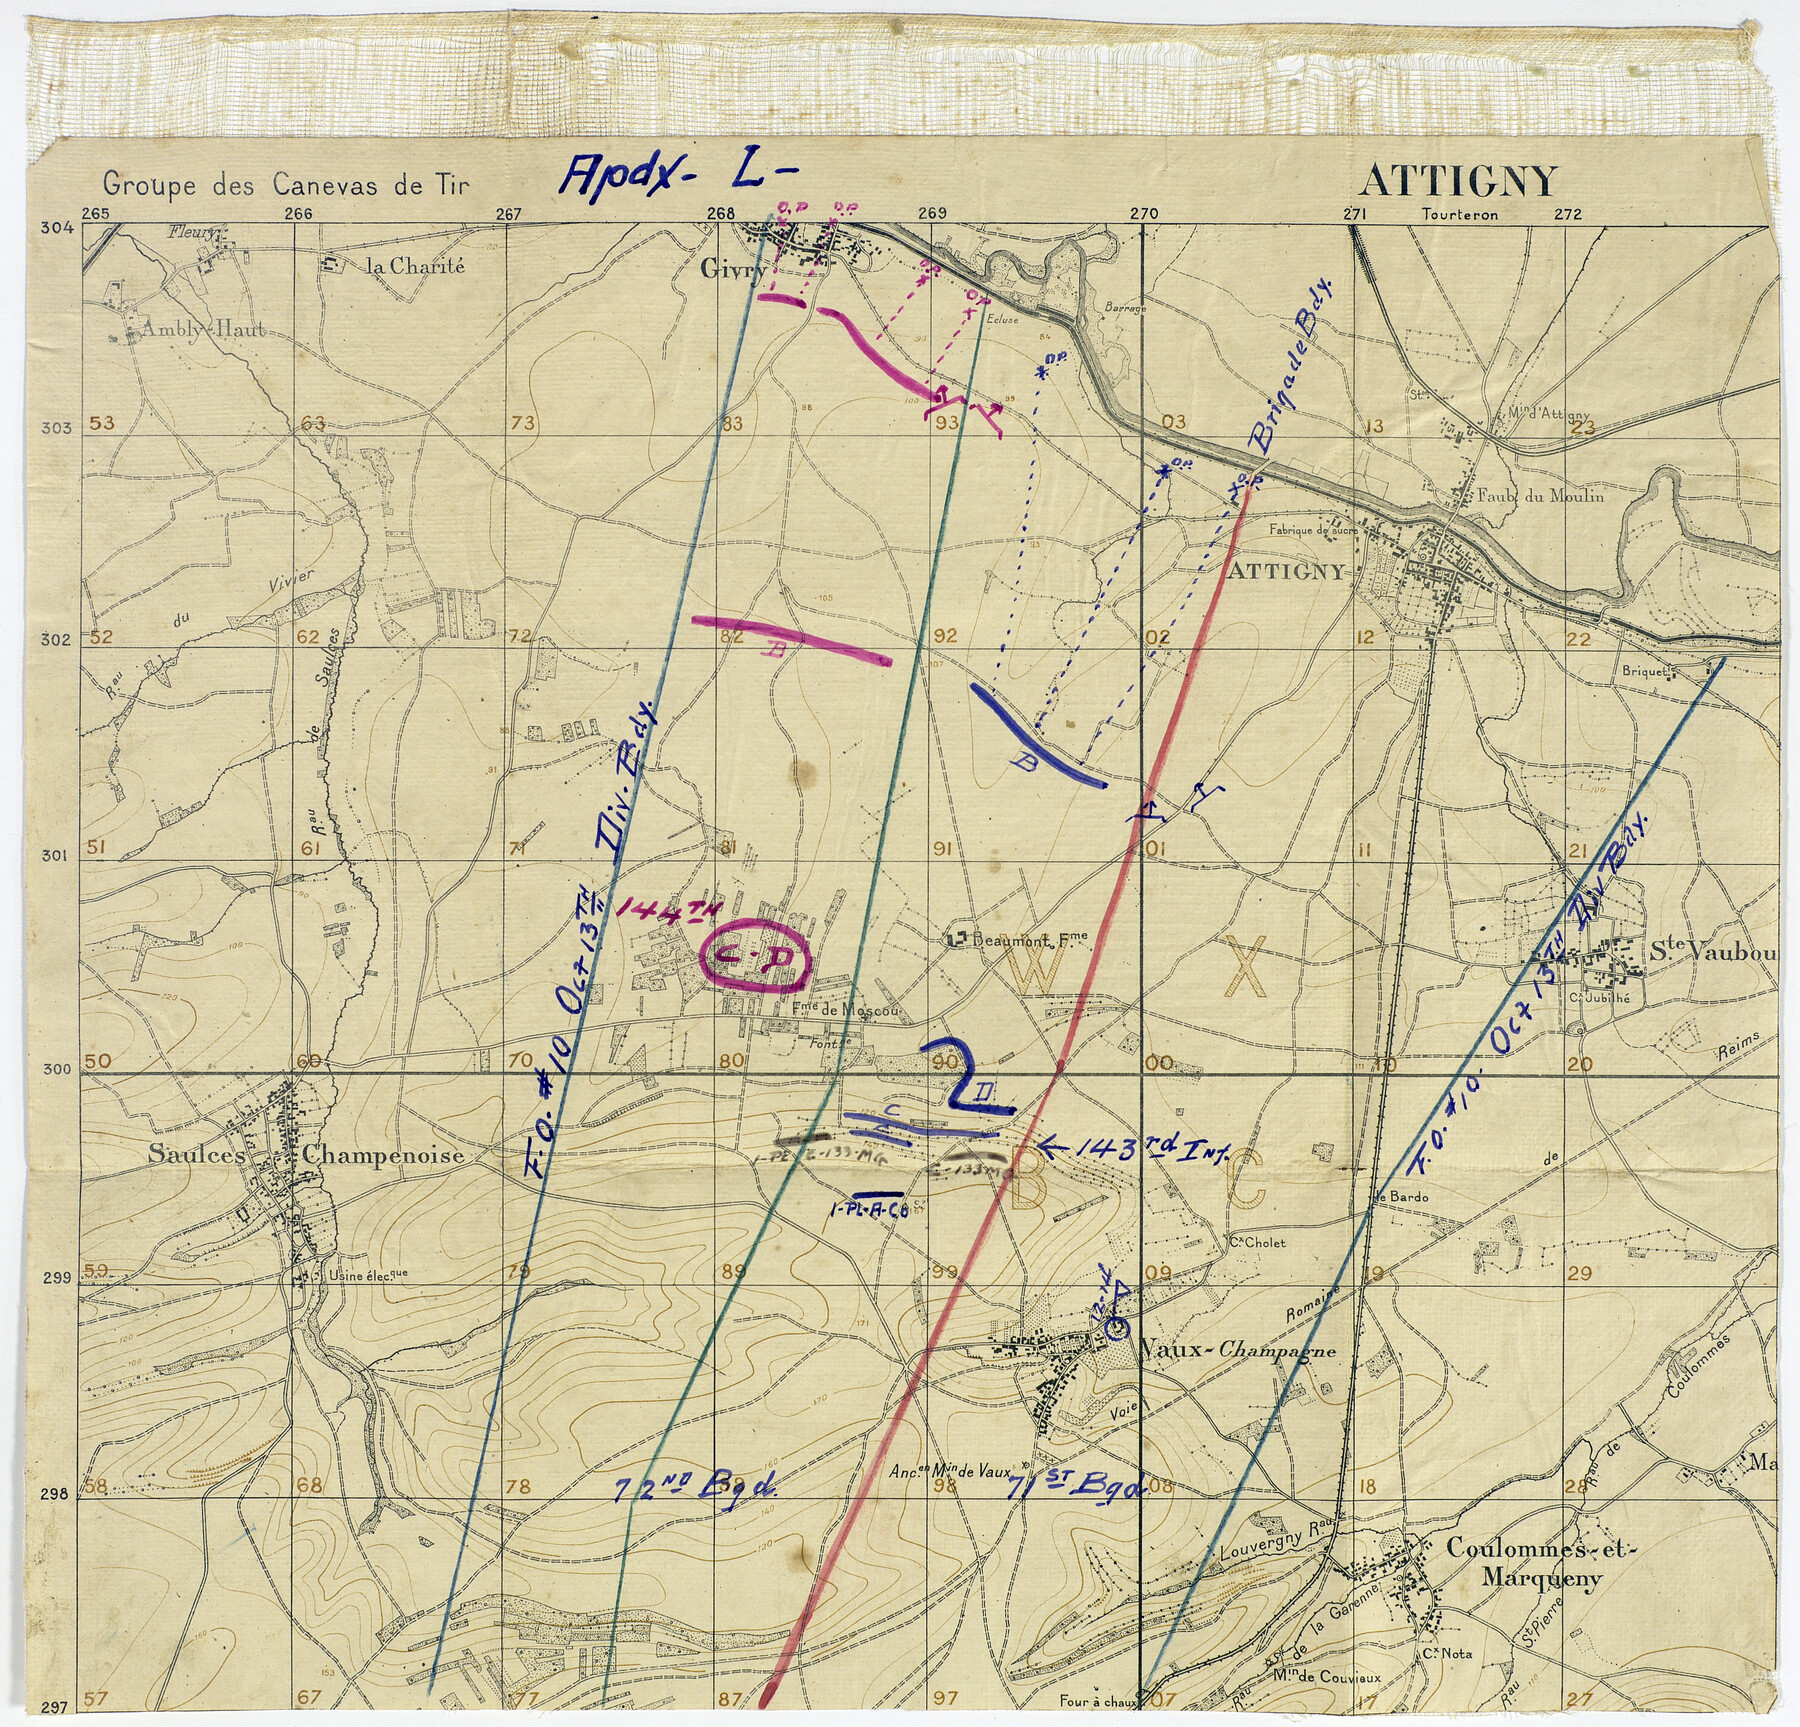 94124, [Movements & Objectives of the 143rd & 144th Infantry on October 13, 1918, Appendix L], Non-GLO Digital Images